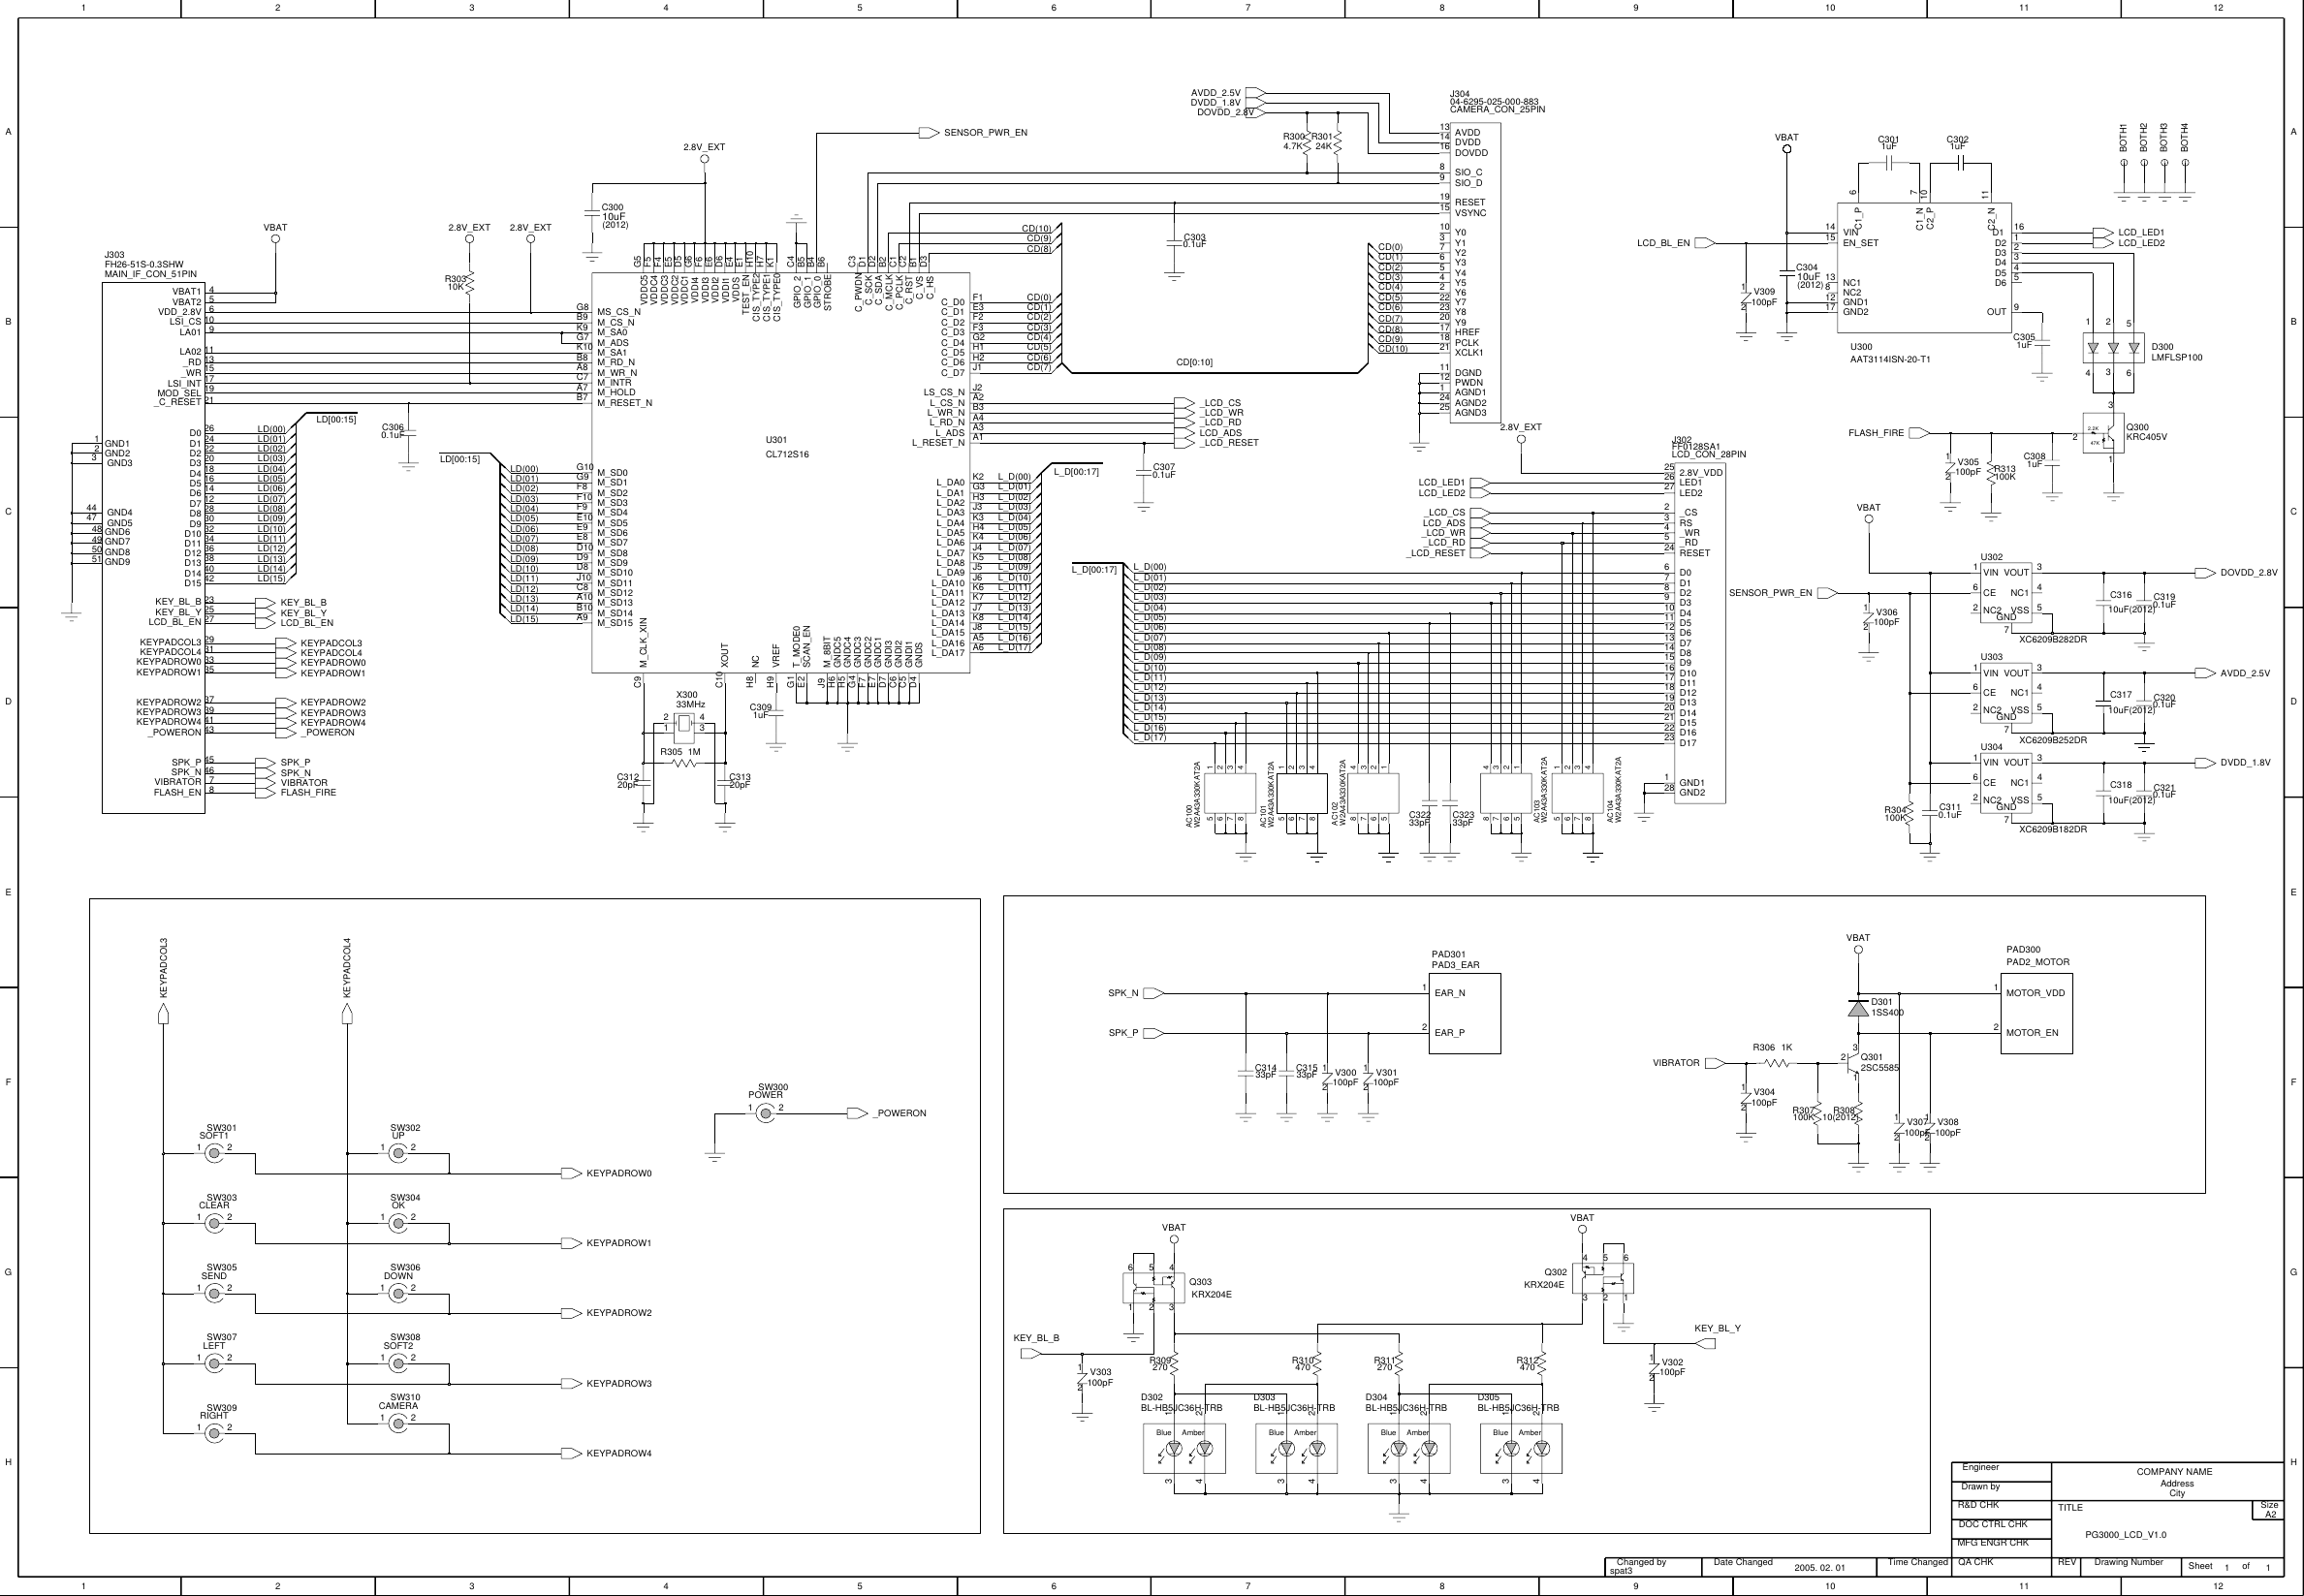 Page 4 of 8 - Pantech-pg3000-schematics